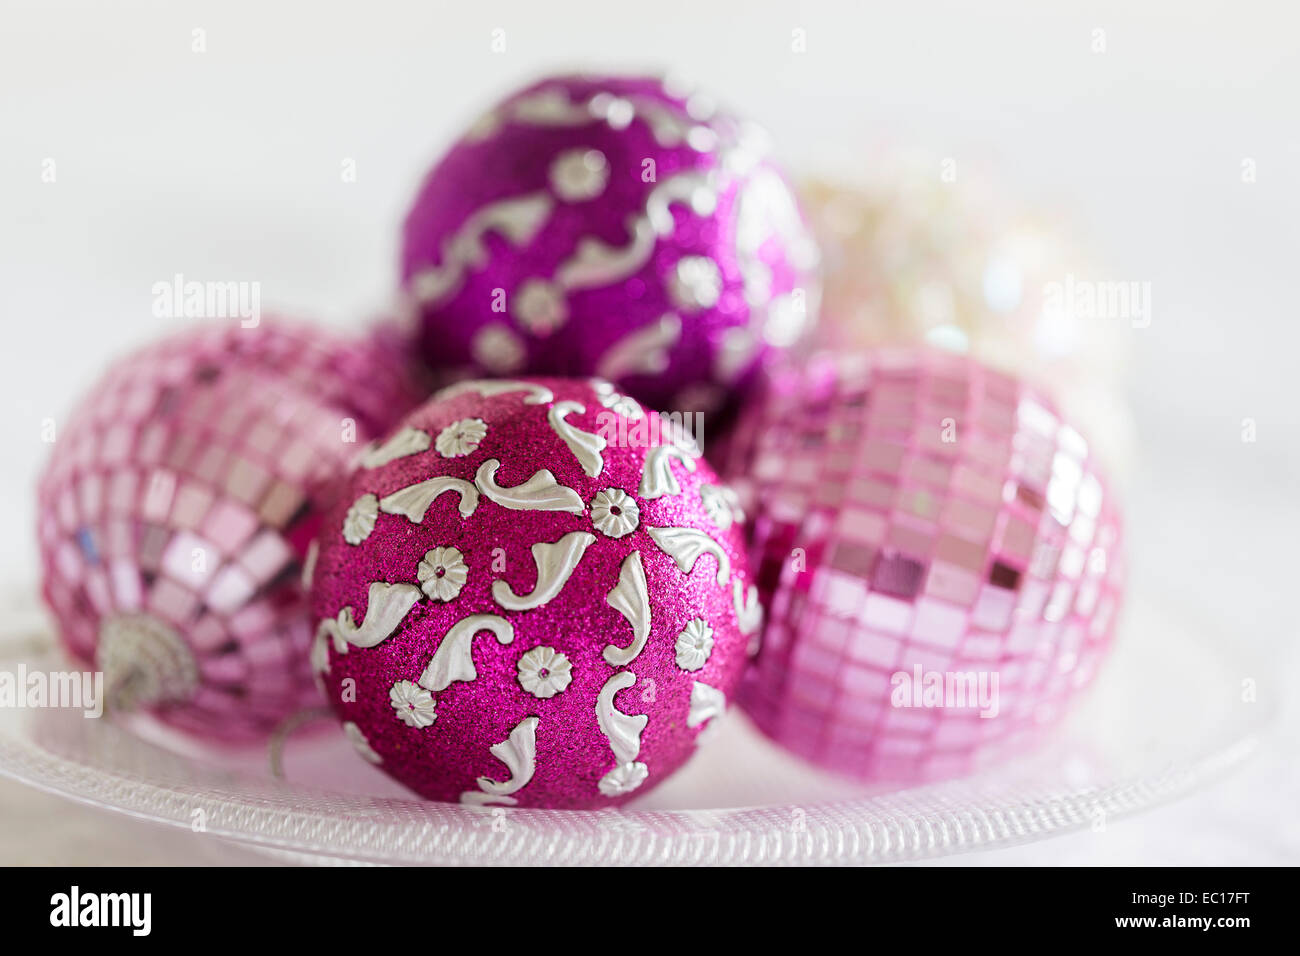 Pink and purple Christmas decorations on a glass plate Stock Photo